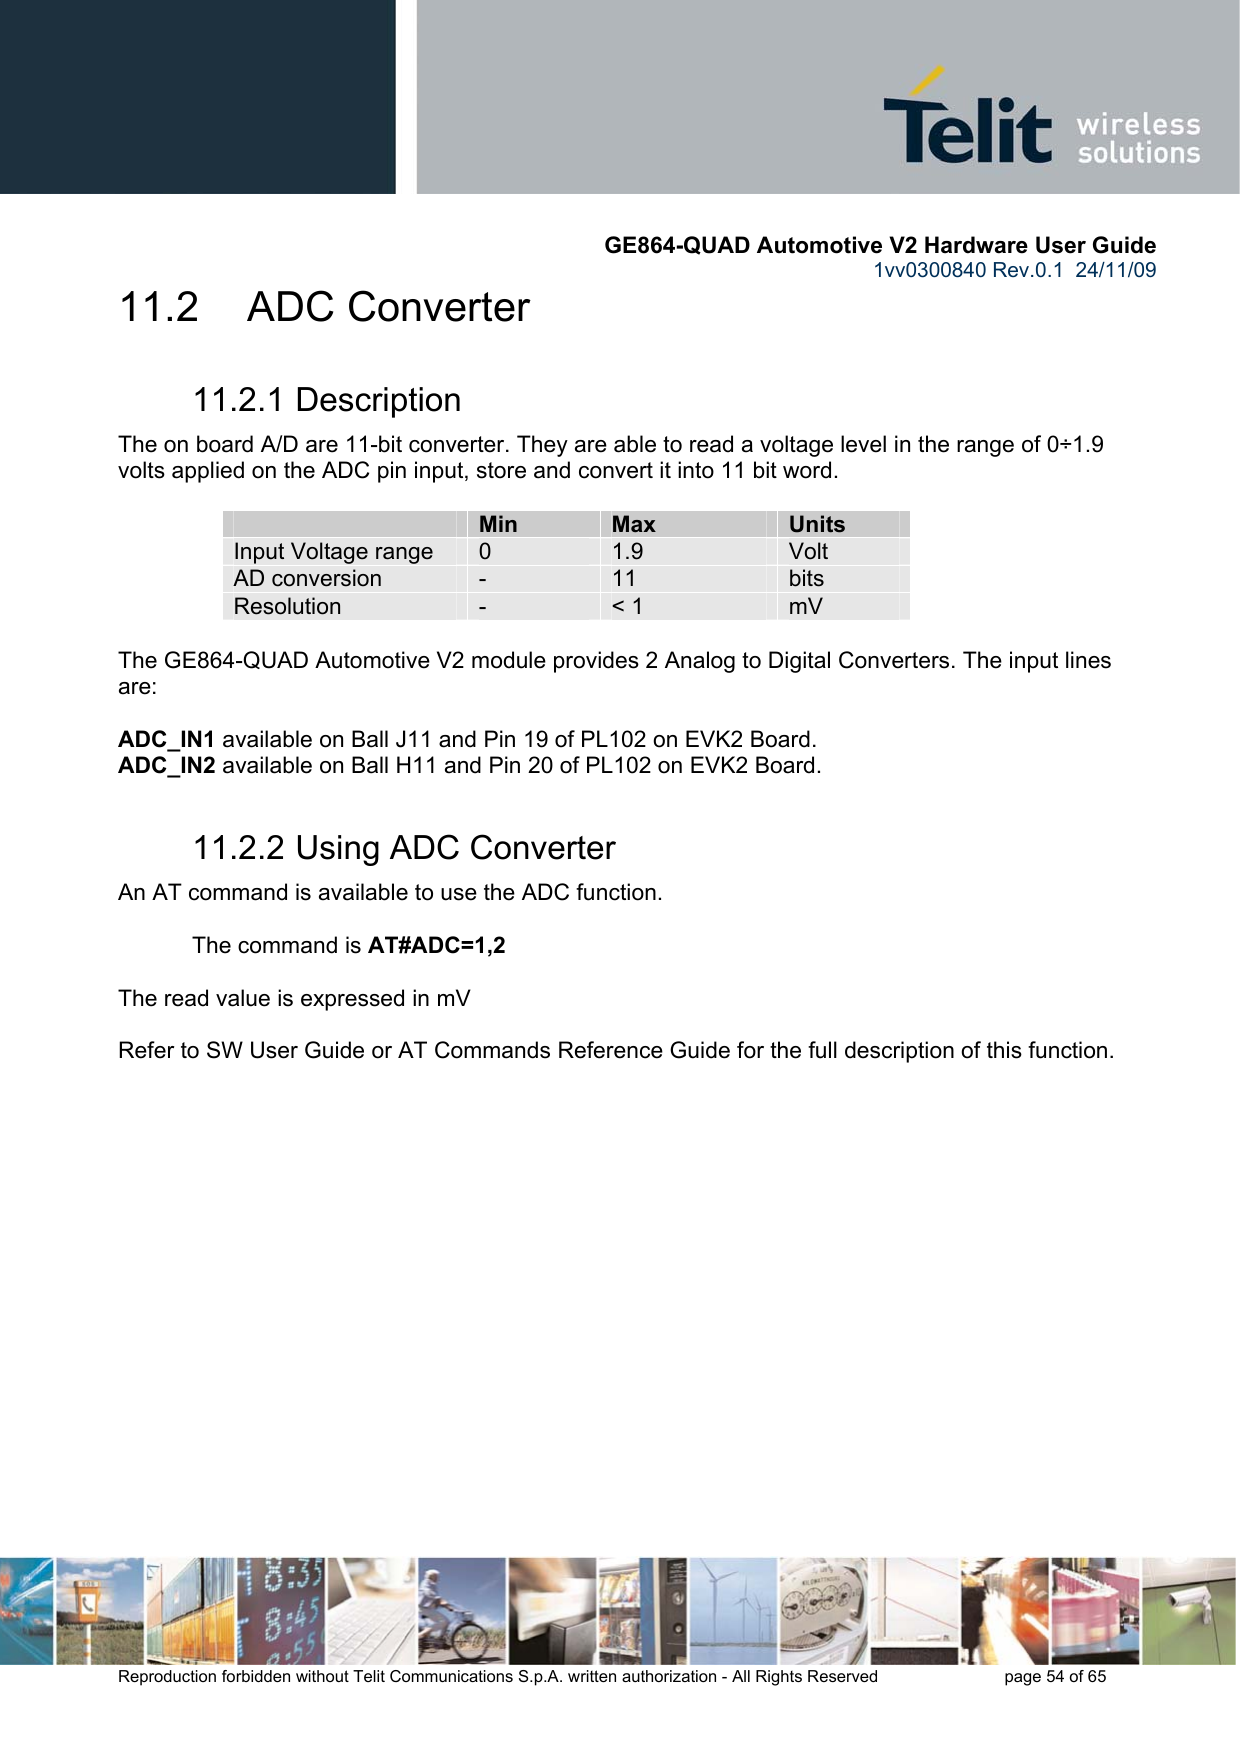       GE864-QUAD Automotive V2 Hardware User Guide 1vv0300840 Rev.0.1  24/11/09      Reproduction forbidden without Telit Communications S.p.A. written authorization - All Rights Reserved    page 54 of 65  11.2     ADC Converter 11.2.1 Description The on board A/D are 11-bit converter. They are able to read a voltage level in the range of 0÷1.9 volts applied on the ADC pin input, store and convert it into 11 bit word.    Min  Max  Units Input Voltage range  0  1.9  Volt AD conversion  -  11  bits Resolution  -  &lt; 1  mV  The GE864-QUAD Automotive V2 module provides 2 Analog to Digital Converters. The input lines are:  ADC_IN1 available on Ball J11 and Pin 19 of PL102 on EVK2 Board. ADC_IN2 available on Ball H11 and Pin 20 of PL102 on EVK2 Board. 11.2.2 Using ADC Converter An AT command is available to use the ADC function.  The command is AT#ADC=1,2  The read value is expressed in mV  Refer to SW User Guide or AT Commands Reference Guide for the full description of this function.     